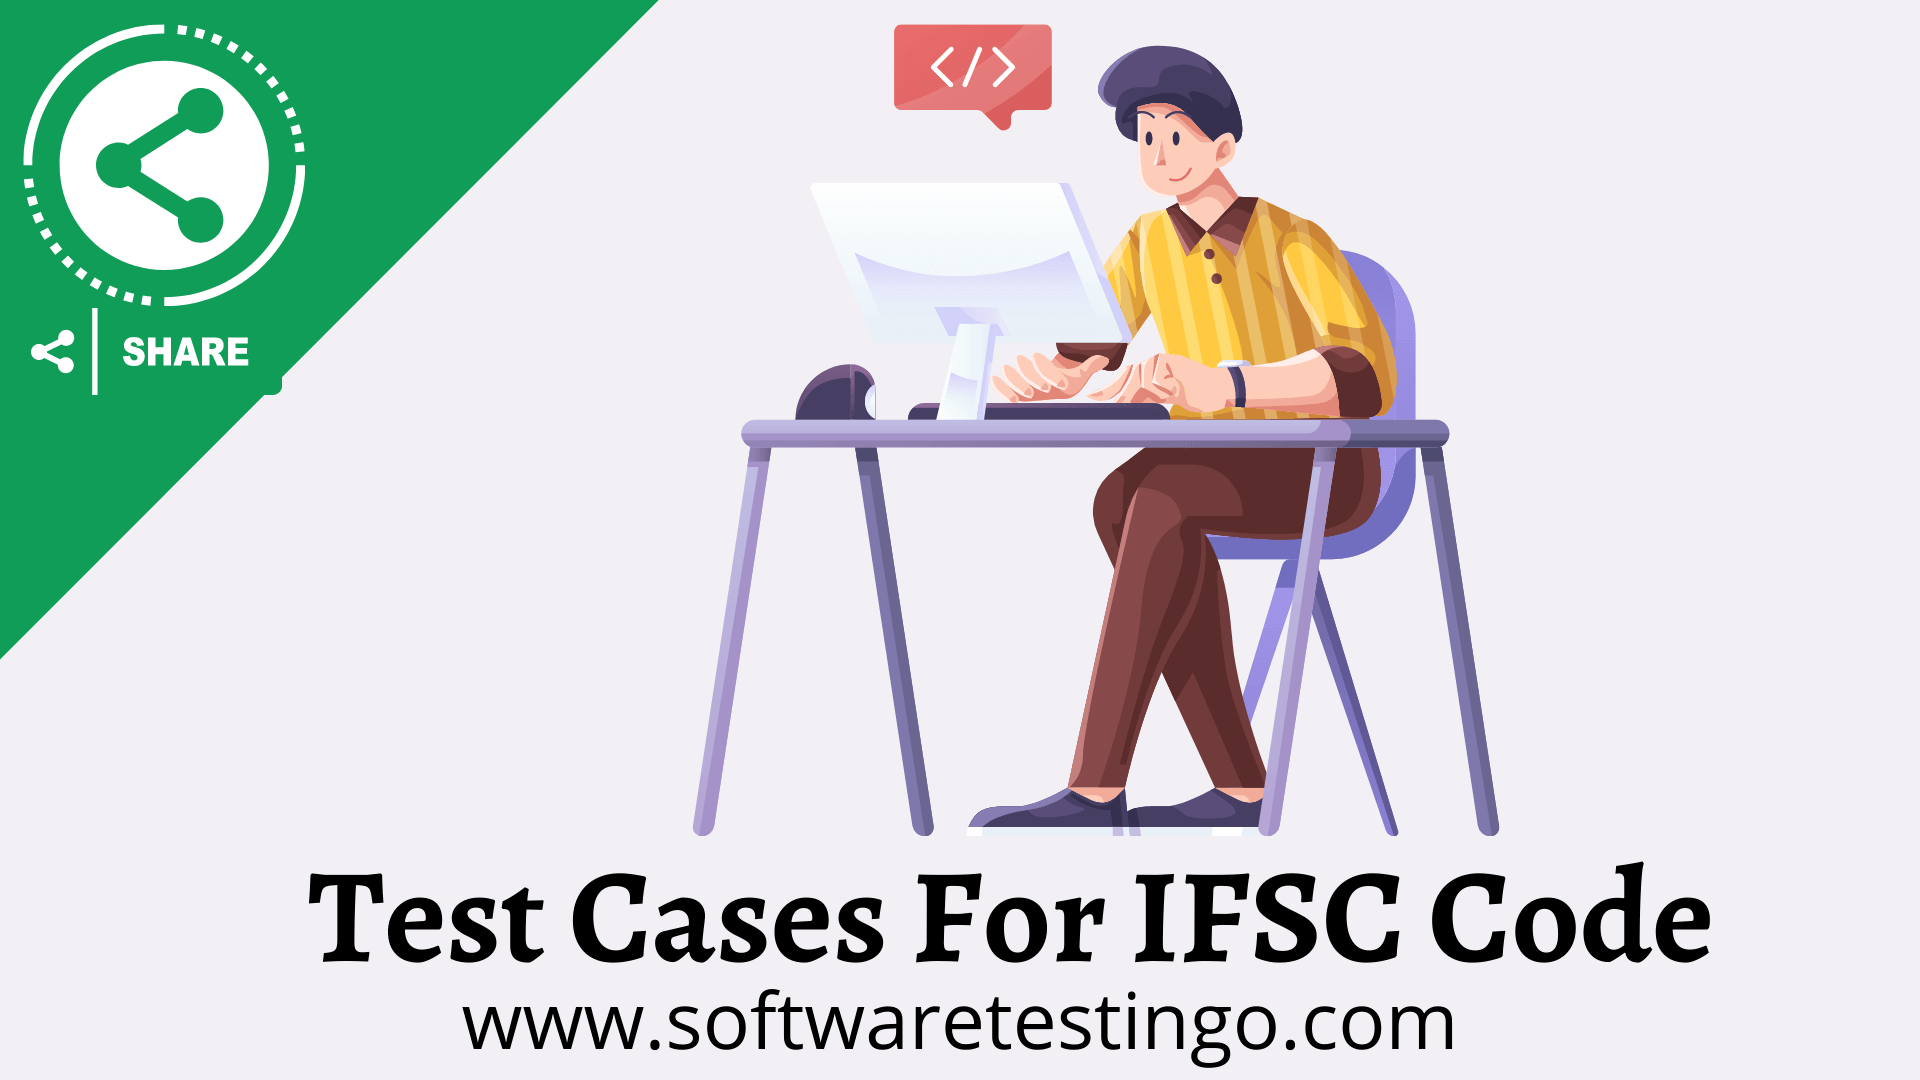 Test Cases For IFSC Code